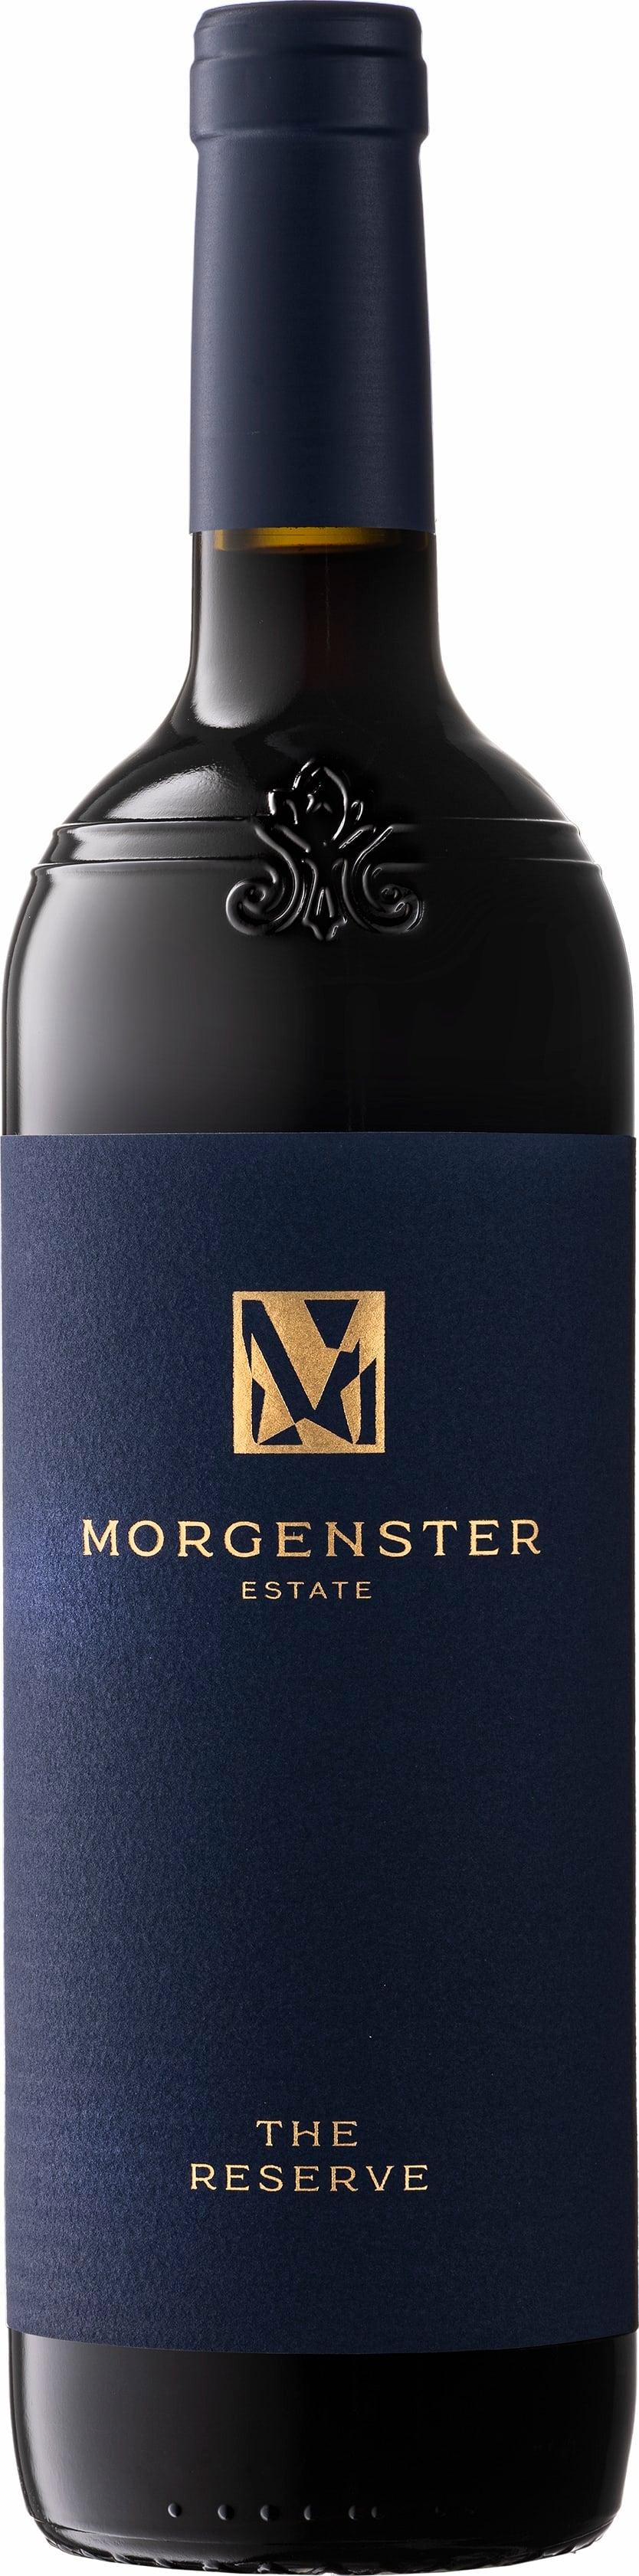 Morgenster Morgenster Estate Reserve Red 2015 75cl - Buy Morgenster Wines from GREAT WINES DIRECT wine shop